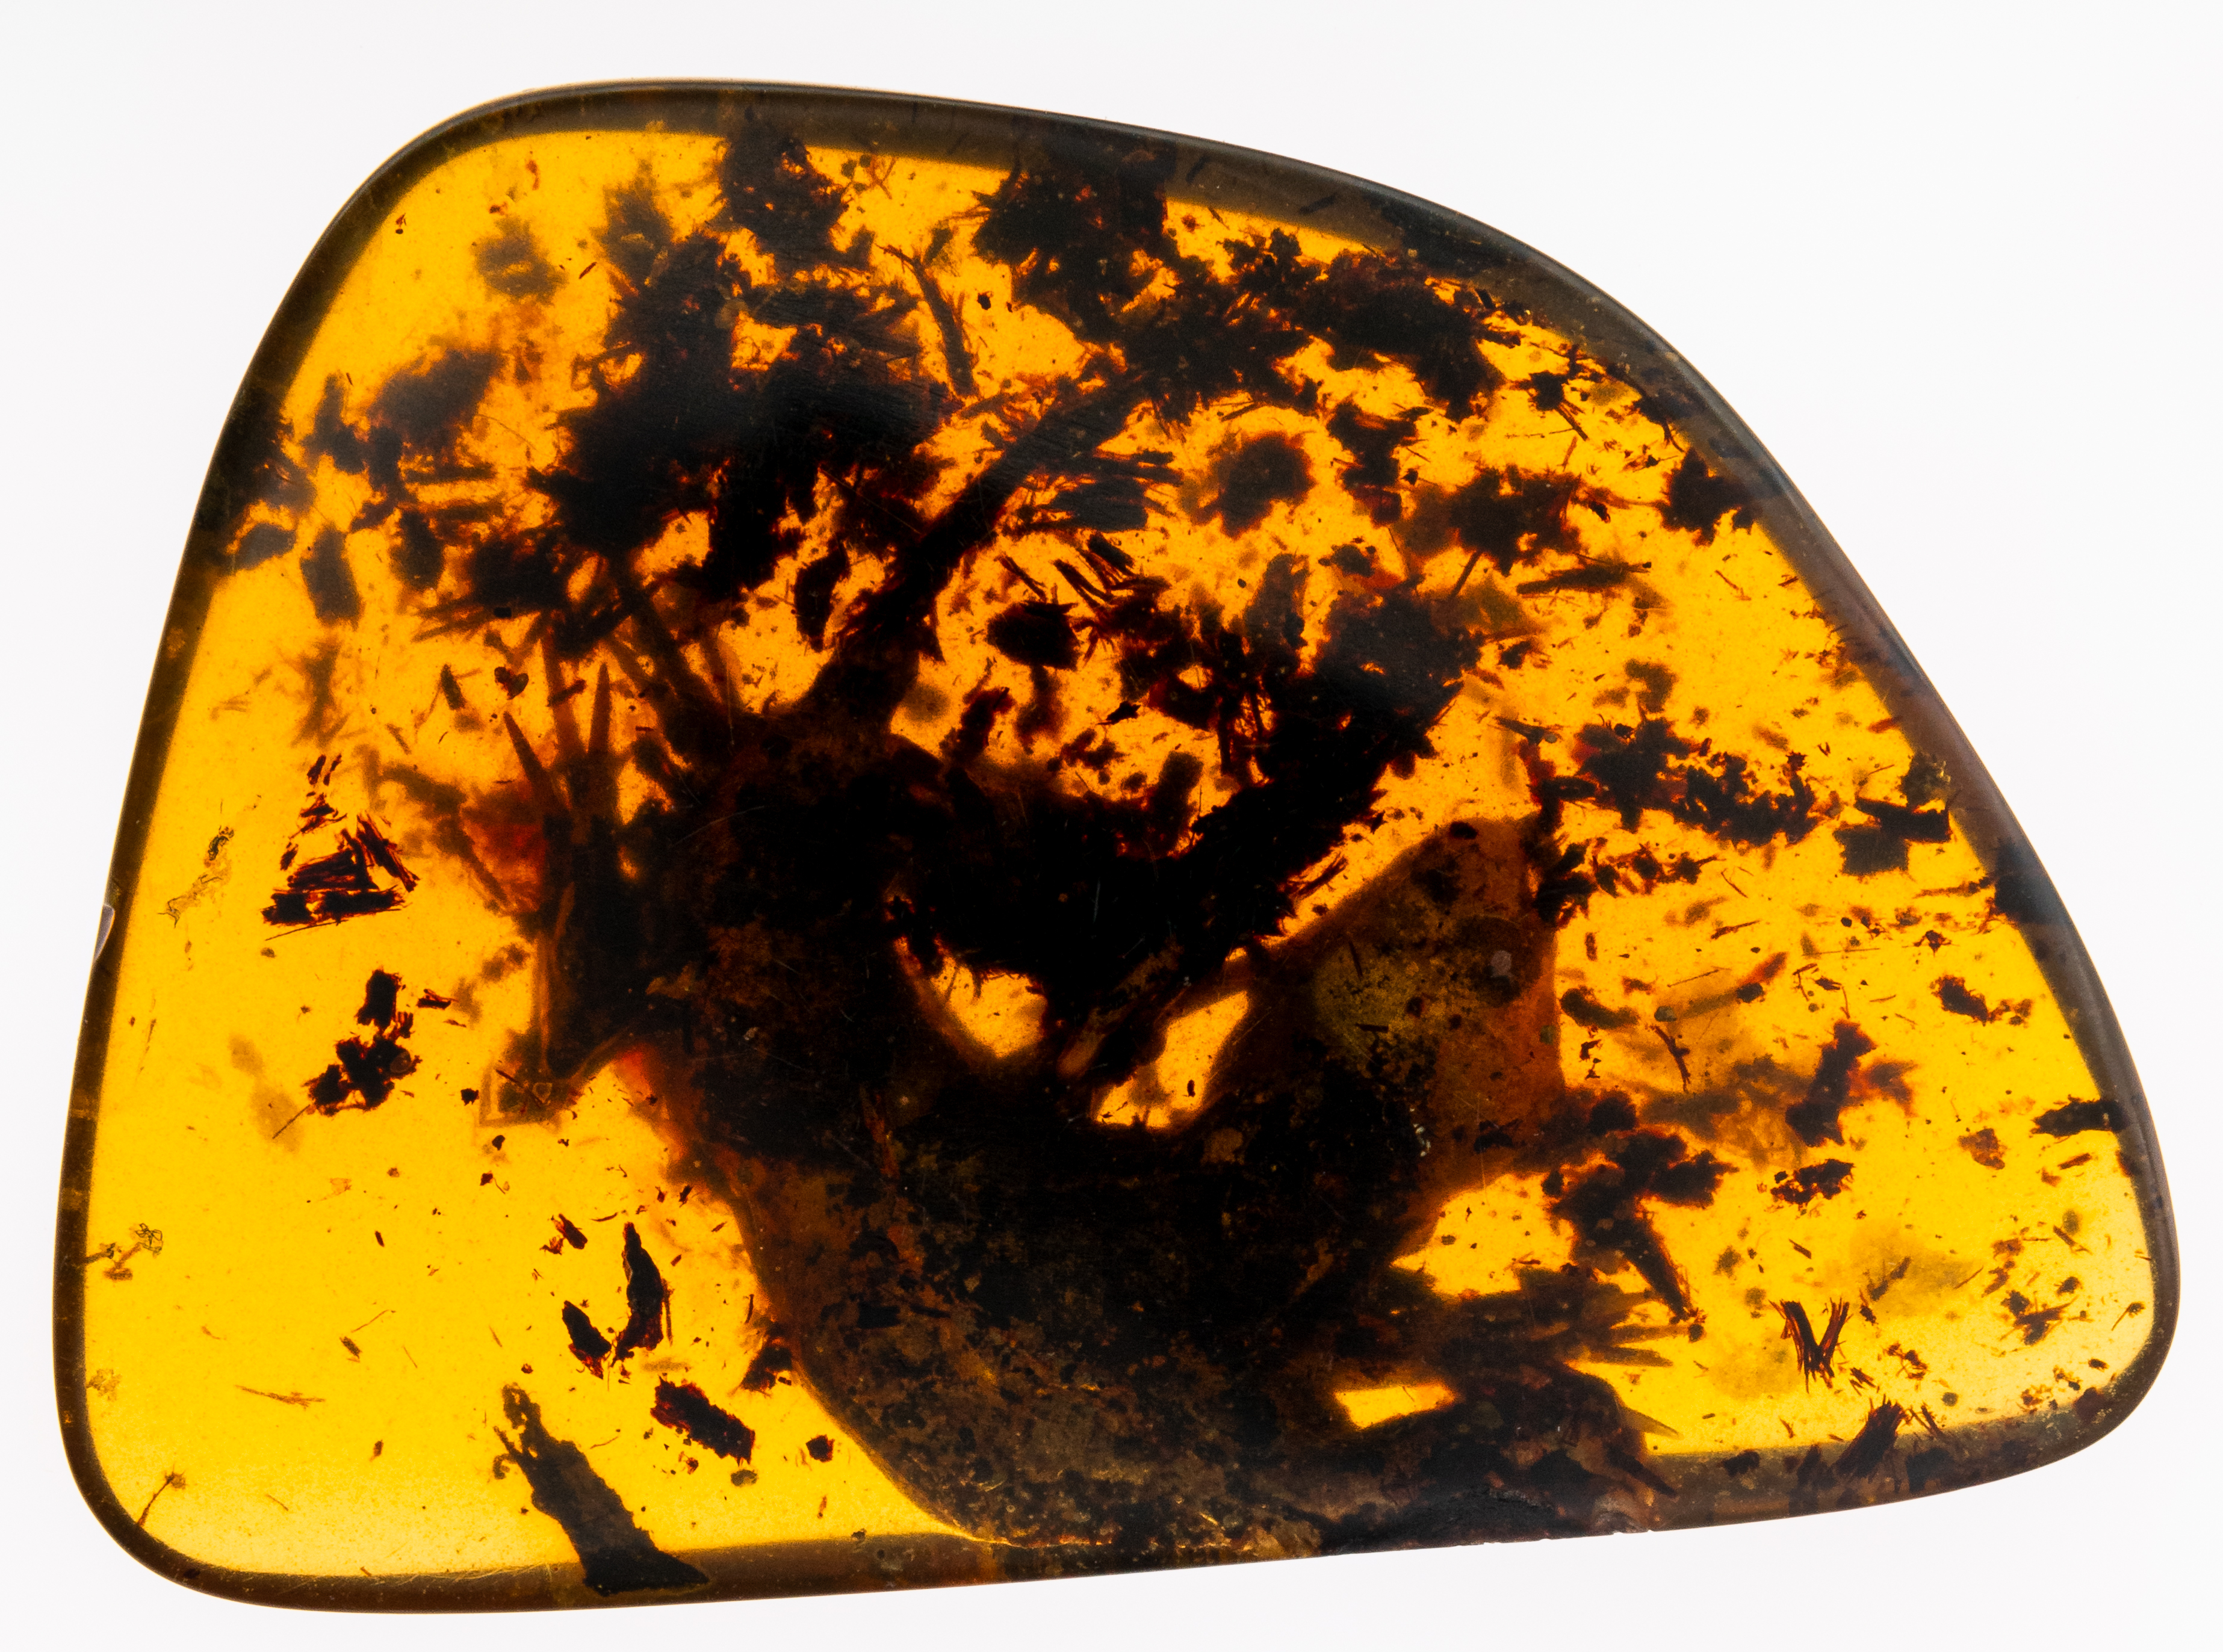 Cretaceous crested newt in amber